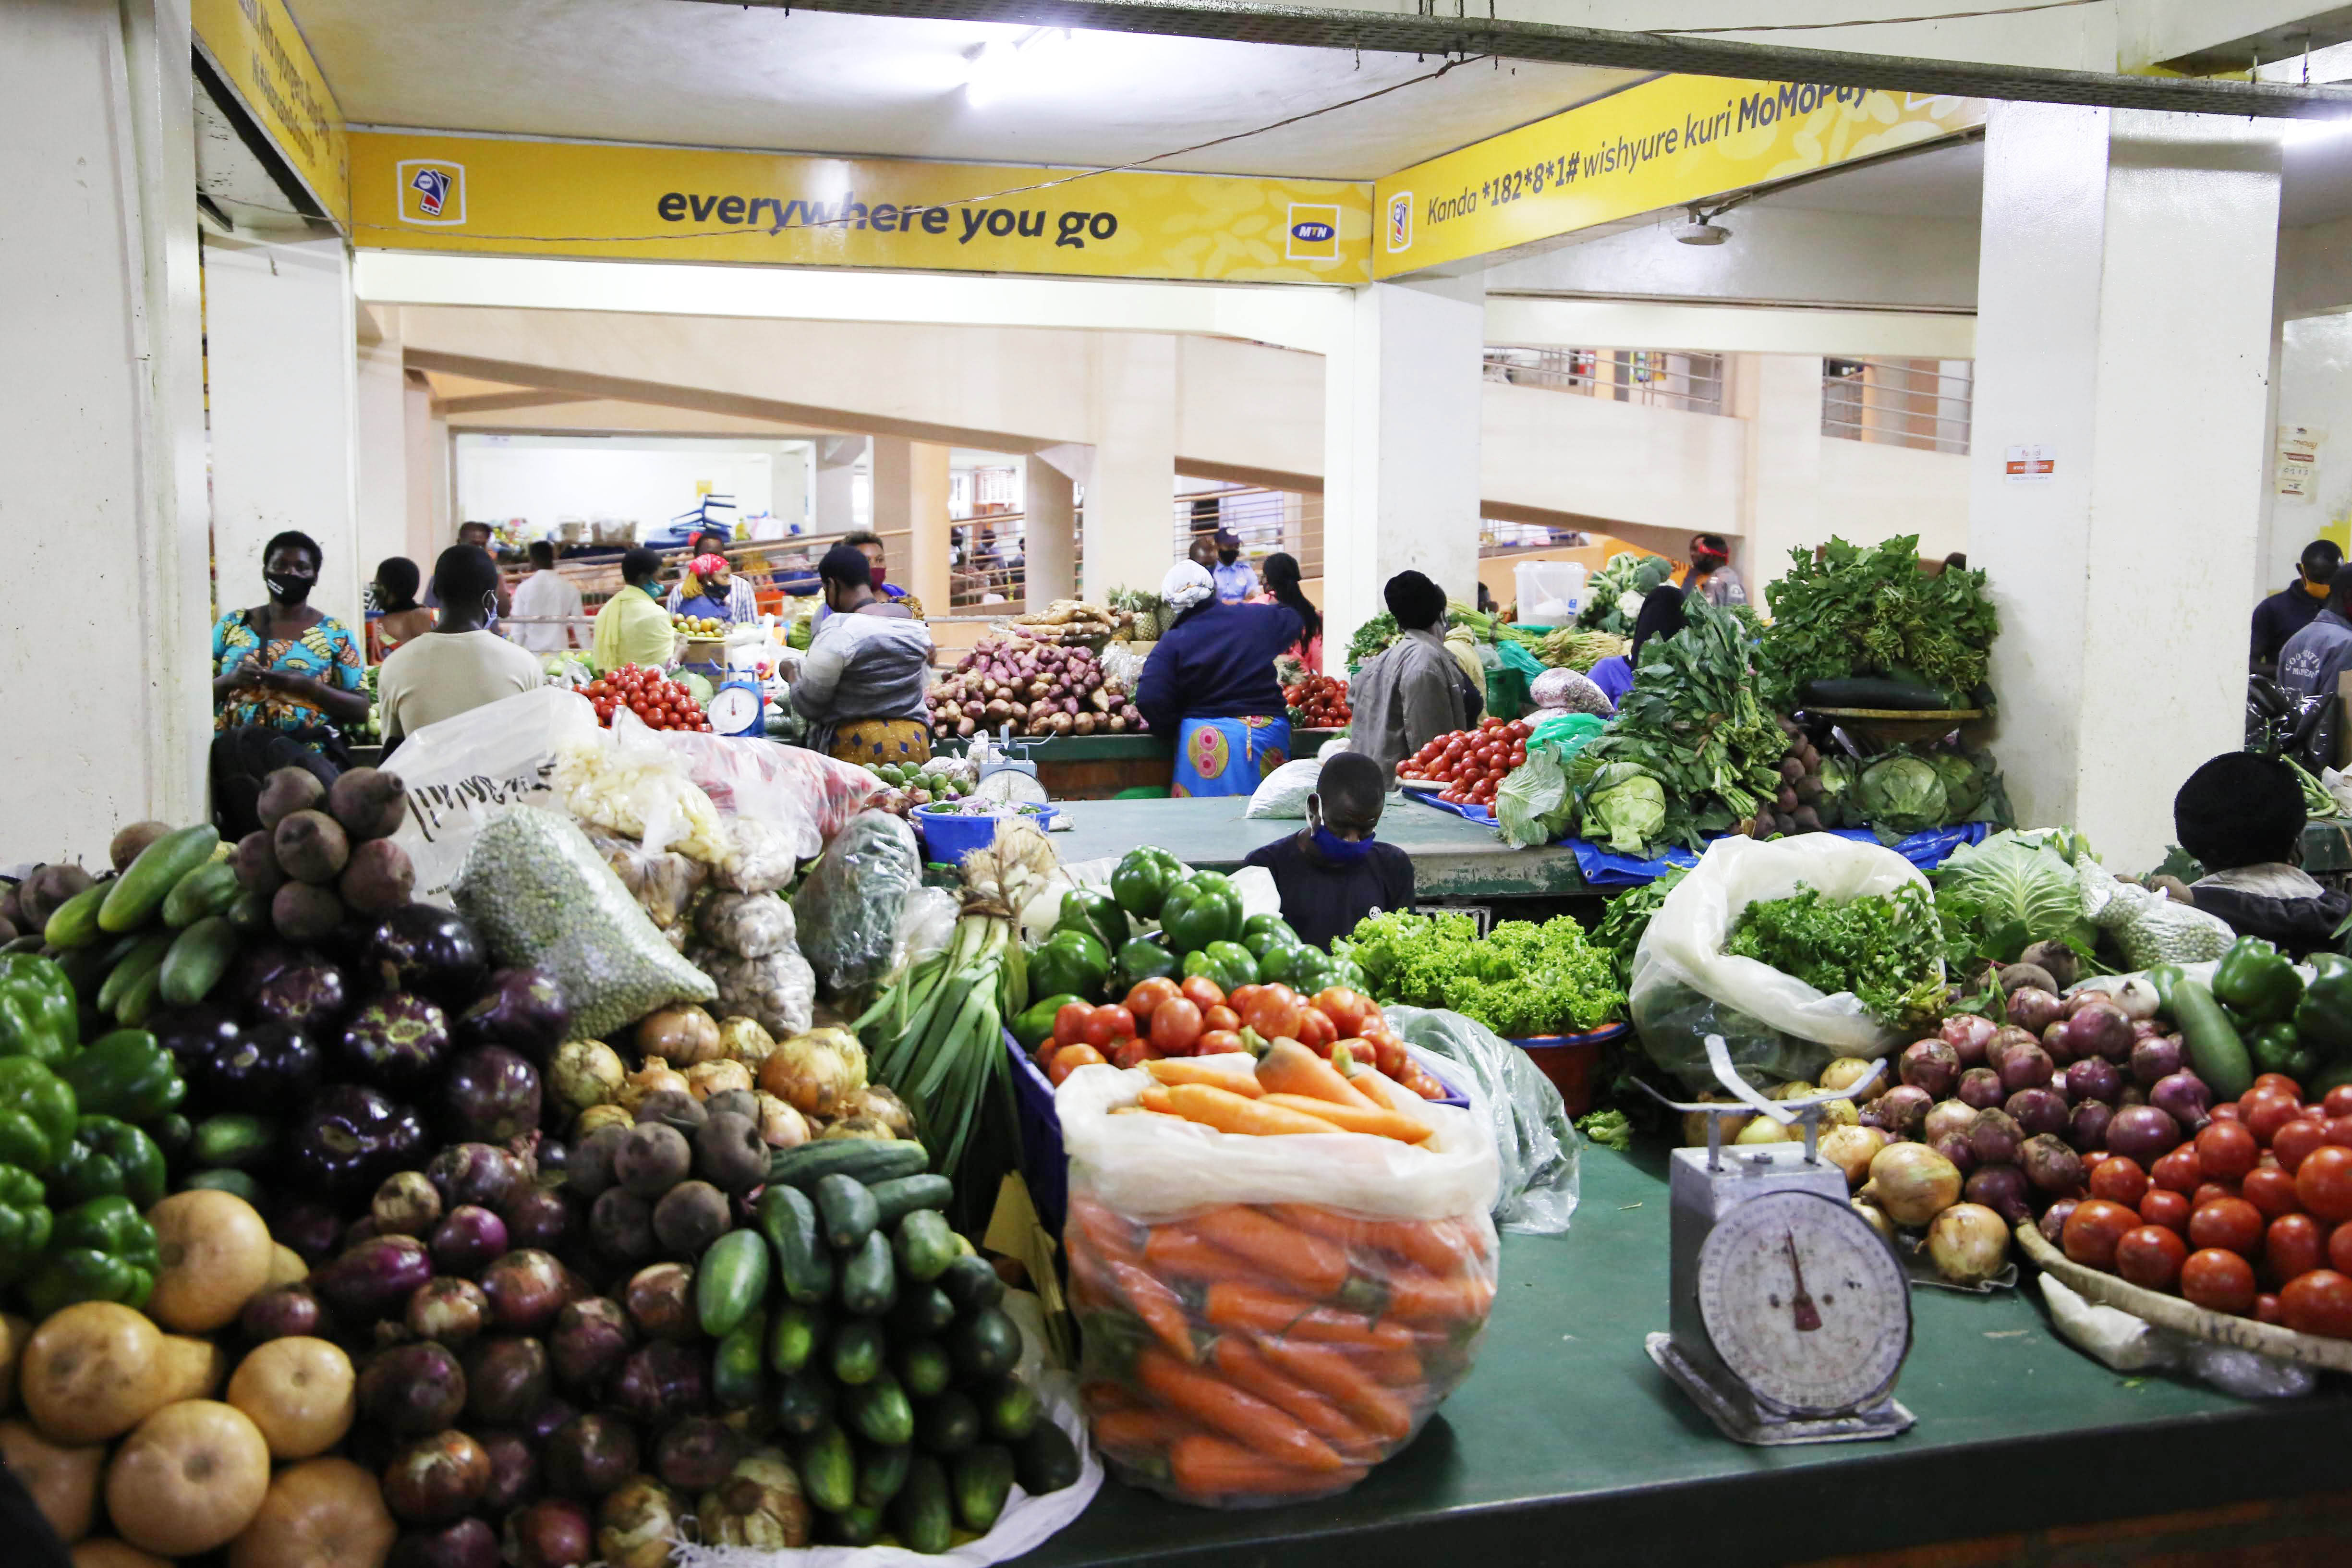 According to the report, the prices for vegetables increased by 34.4 percent, bread and cereals by 26.3 percent, meat by 18 percent, milk, cheese and eggs by 11.2 percent while non-alcoholic beverages prices increased by 10.4 percent.